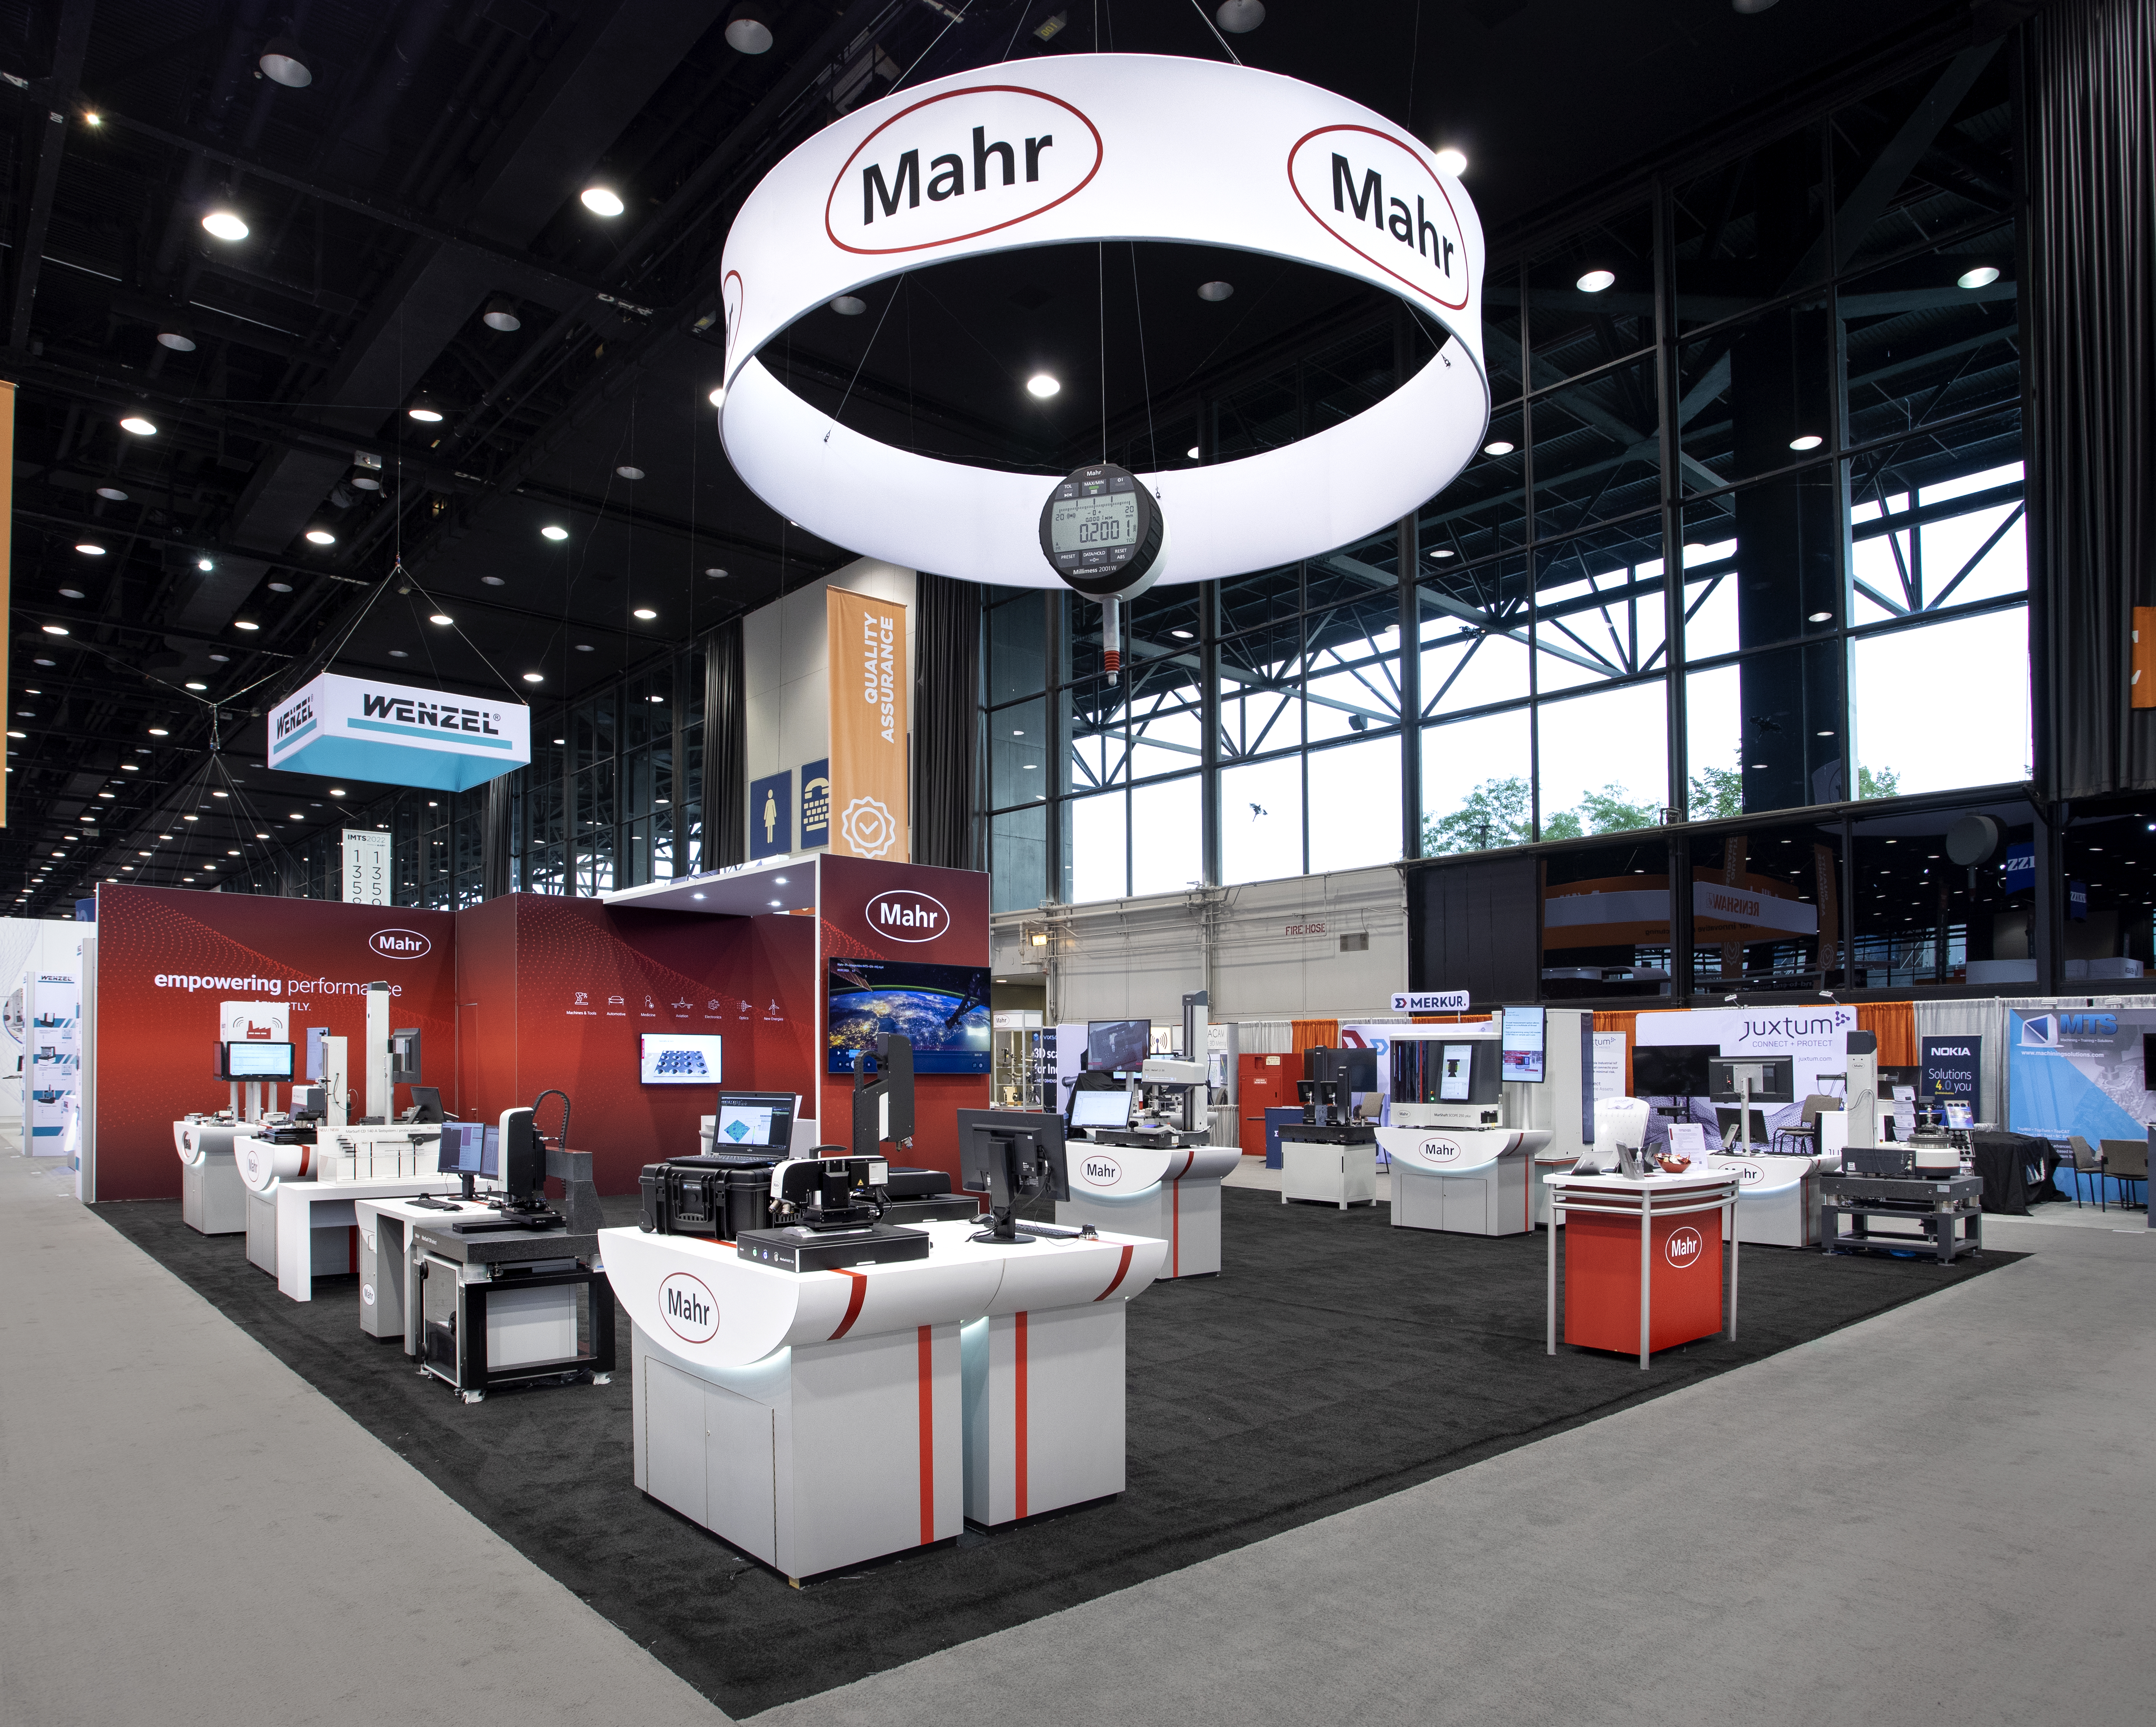 A Mahr showcase at the International Manufacturing Technology Show in 2022 full of bright technological displays.